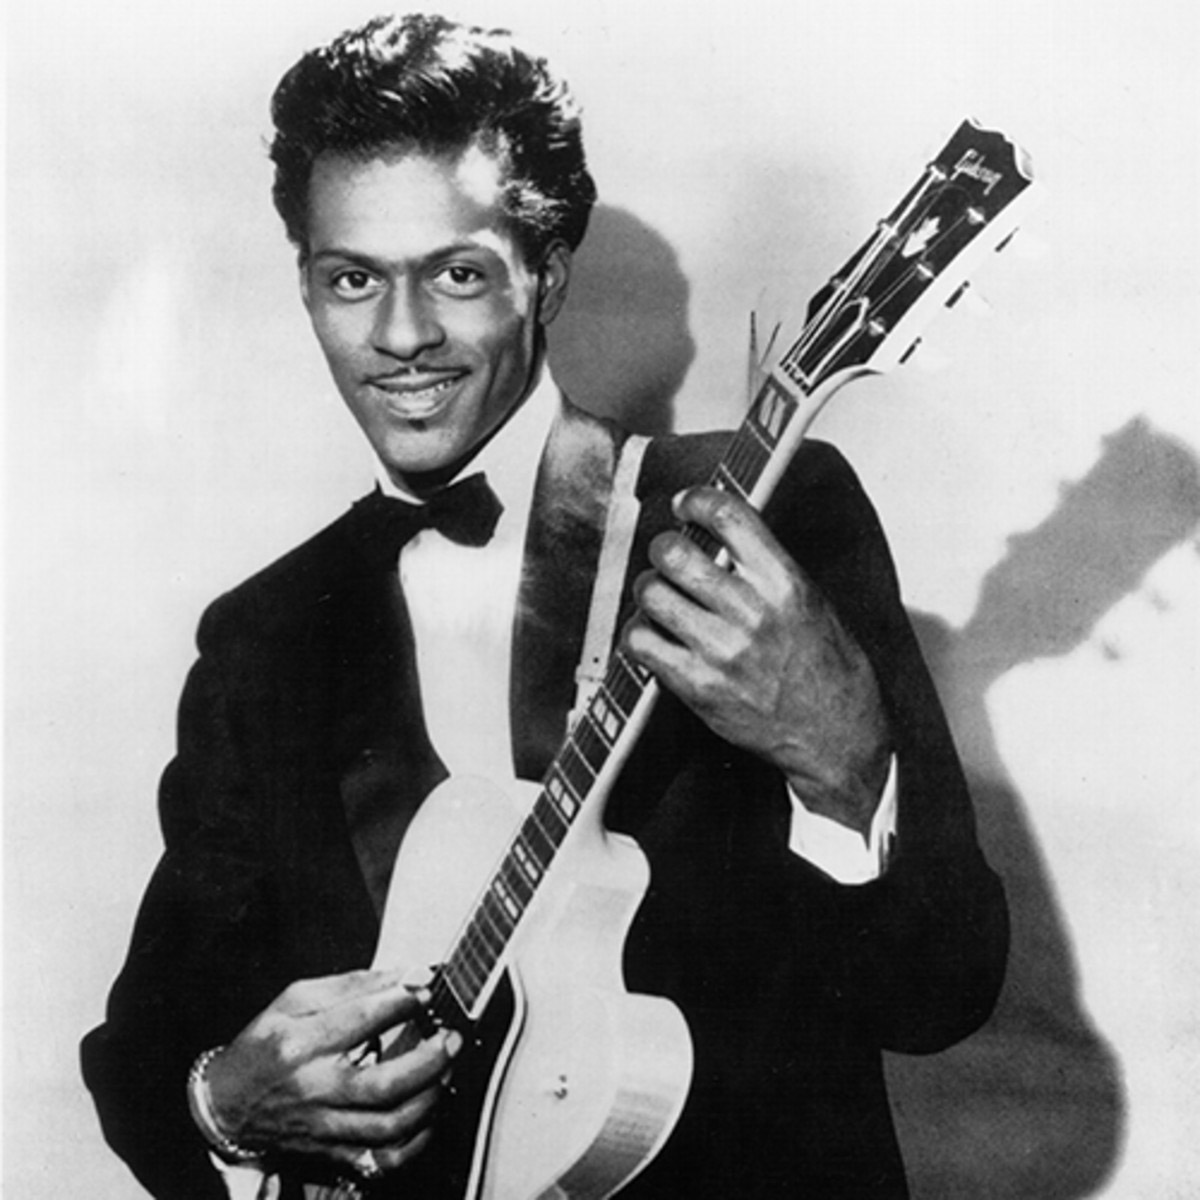 Chuck Berry (Chuck Berry) in his youth